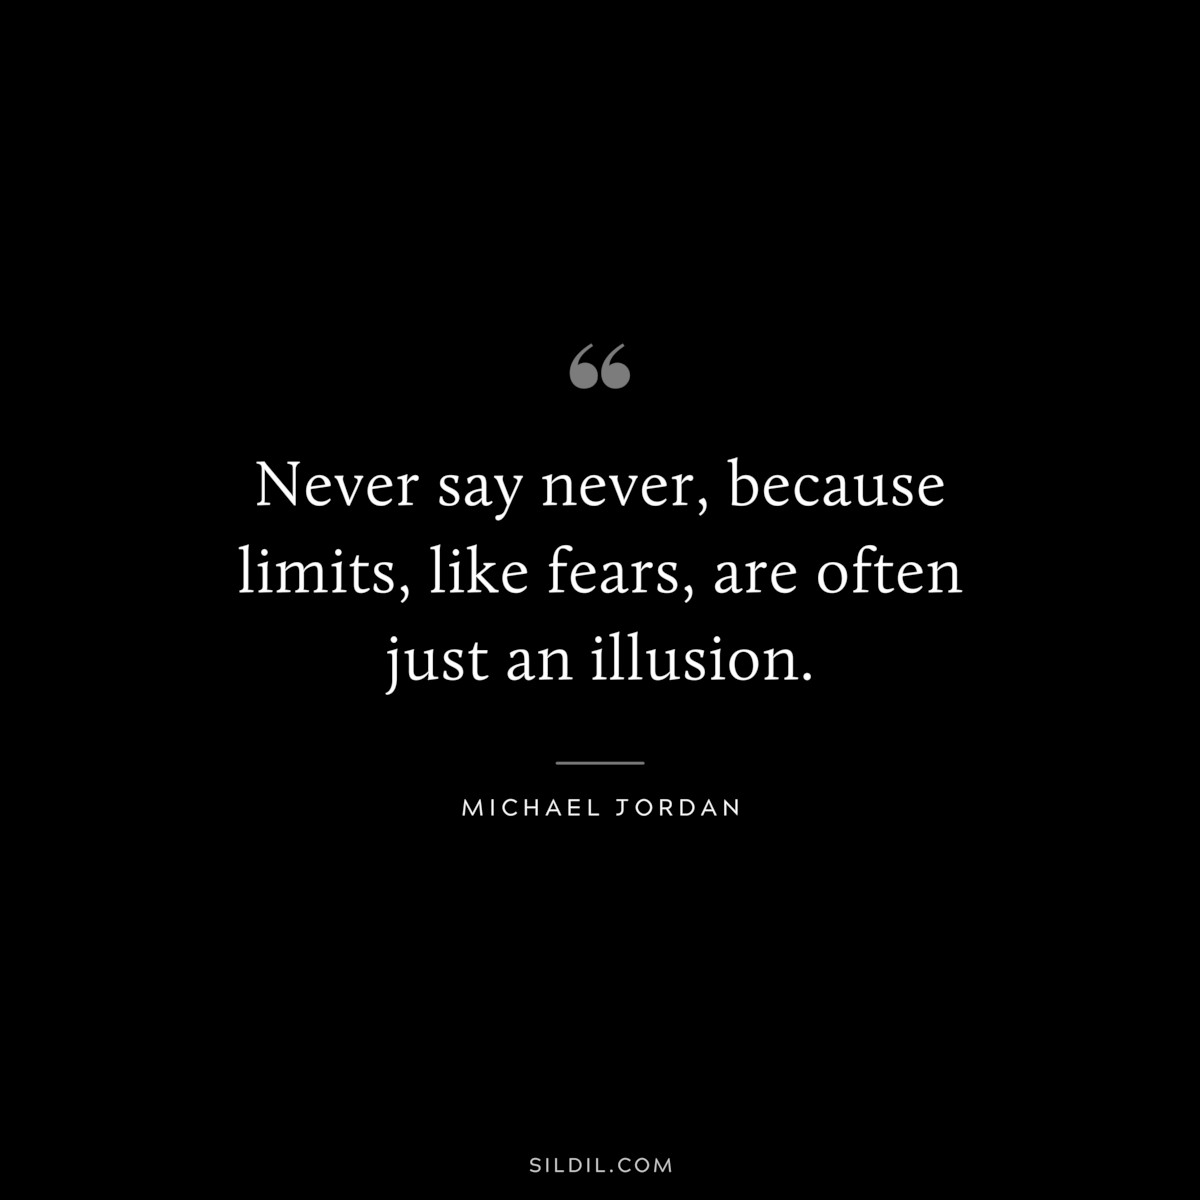 Never say never, because limits, like fears, are often just an illusion. ― Michael Jordan